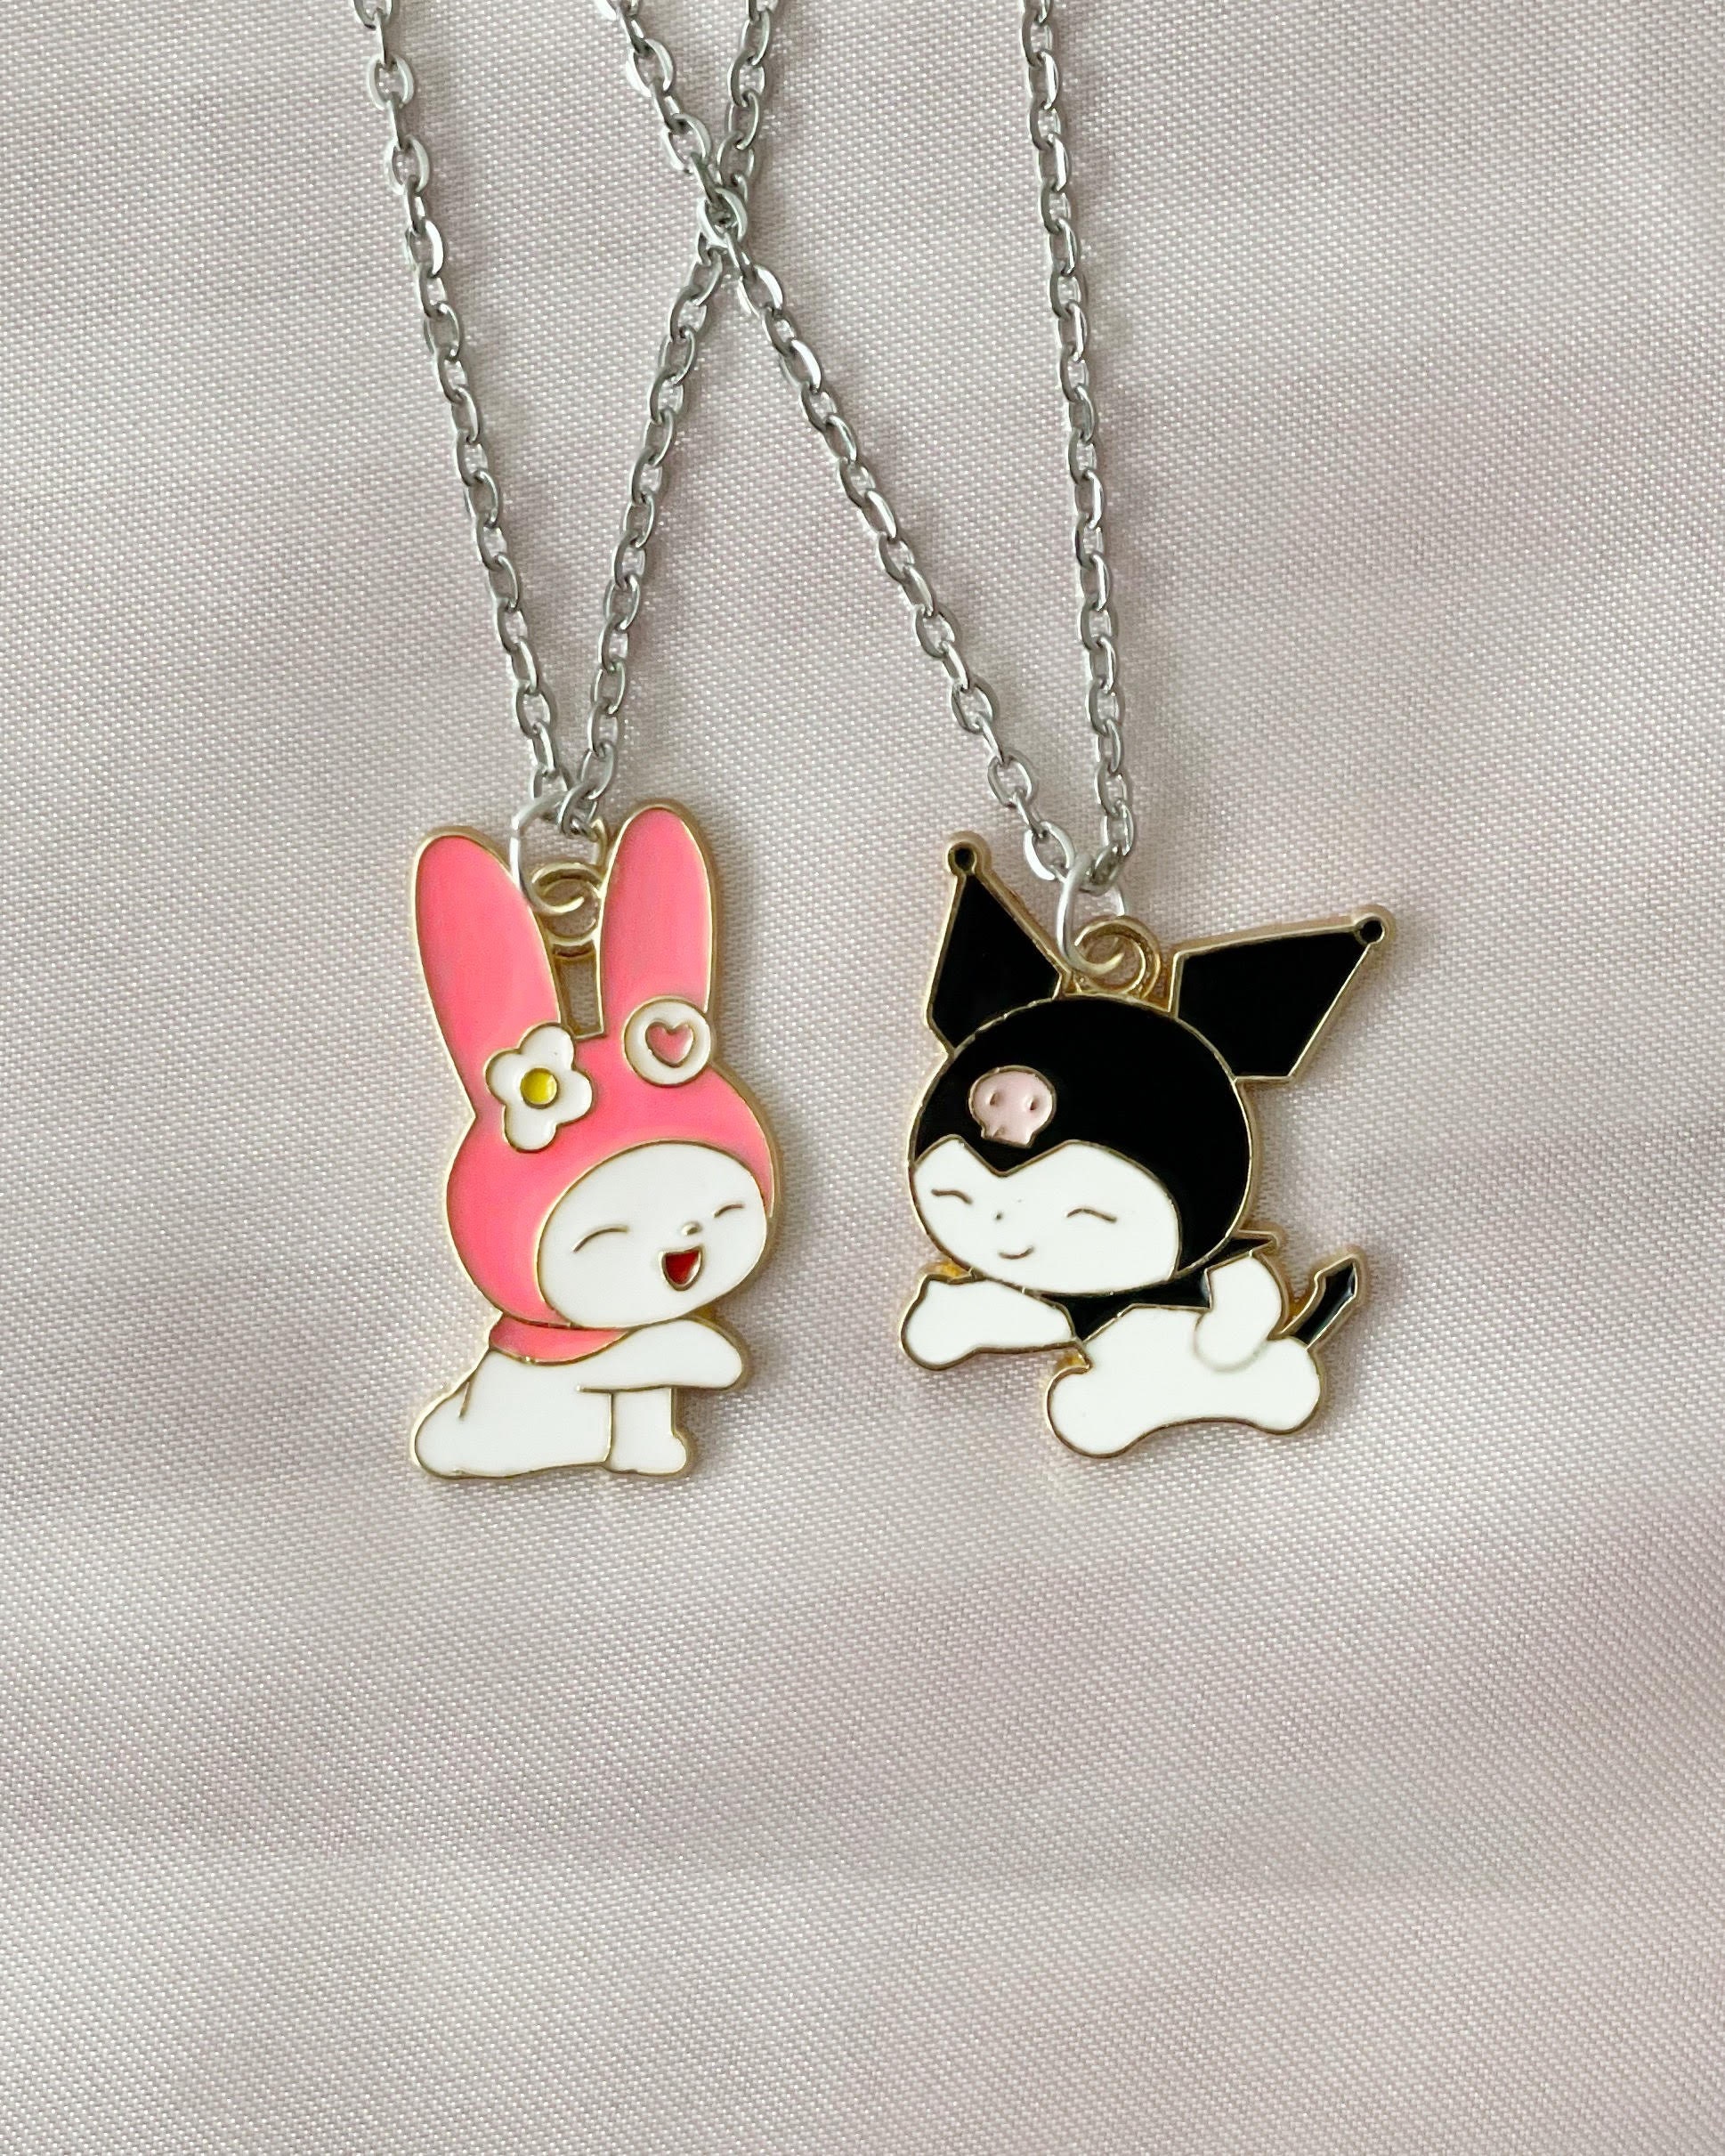 Buy Anime Necklace Online In India - Etsy India